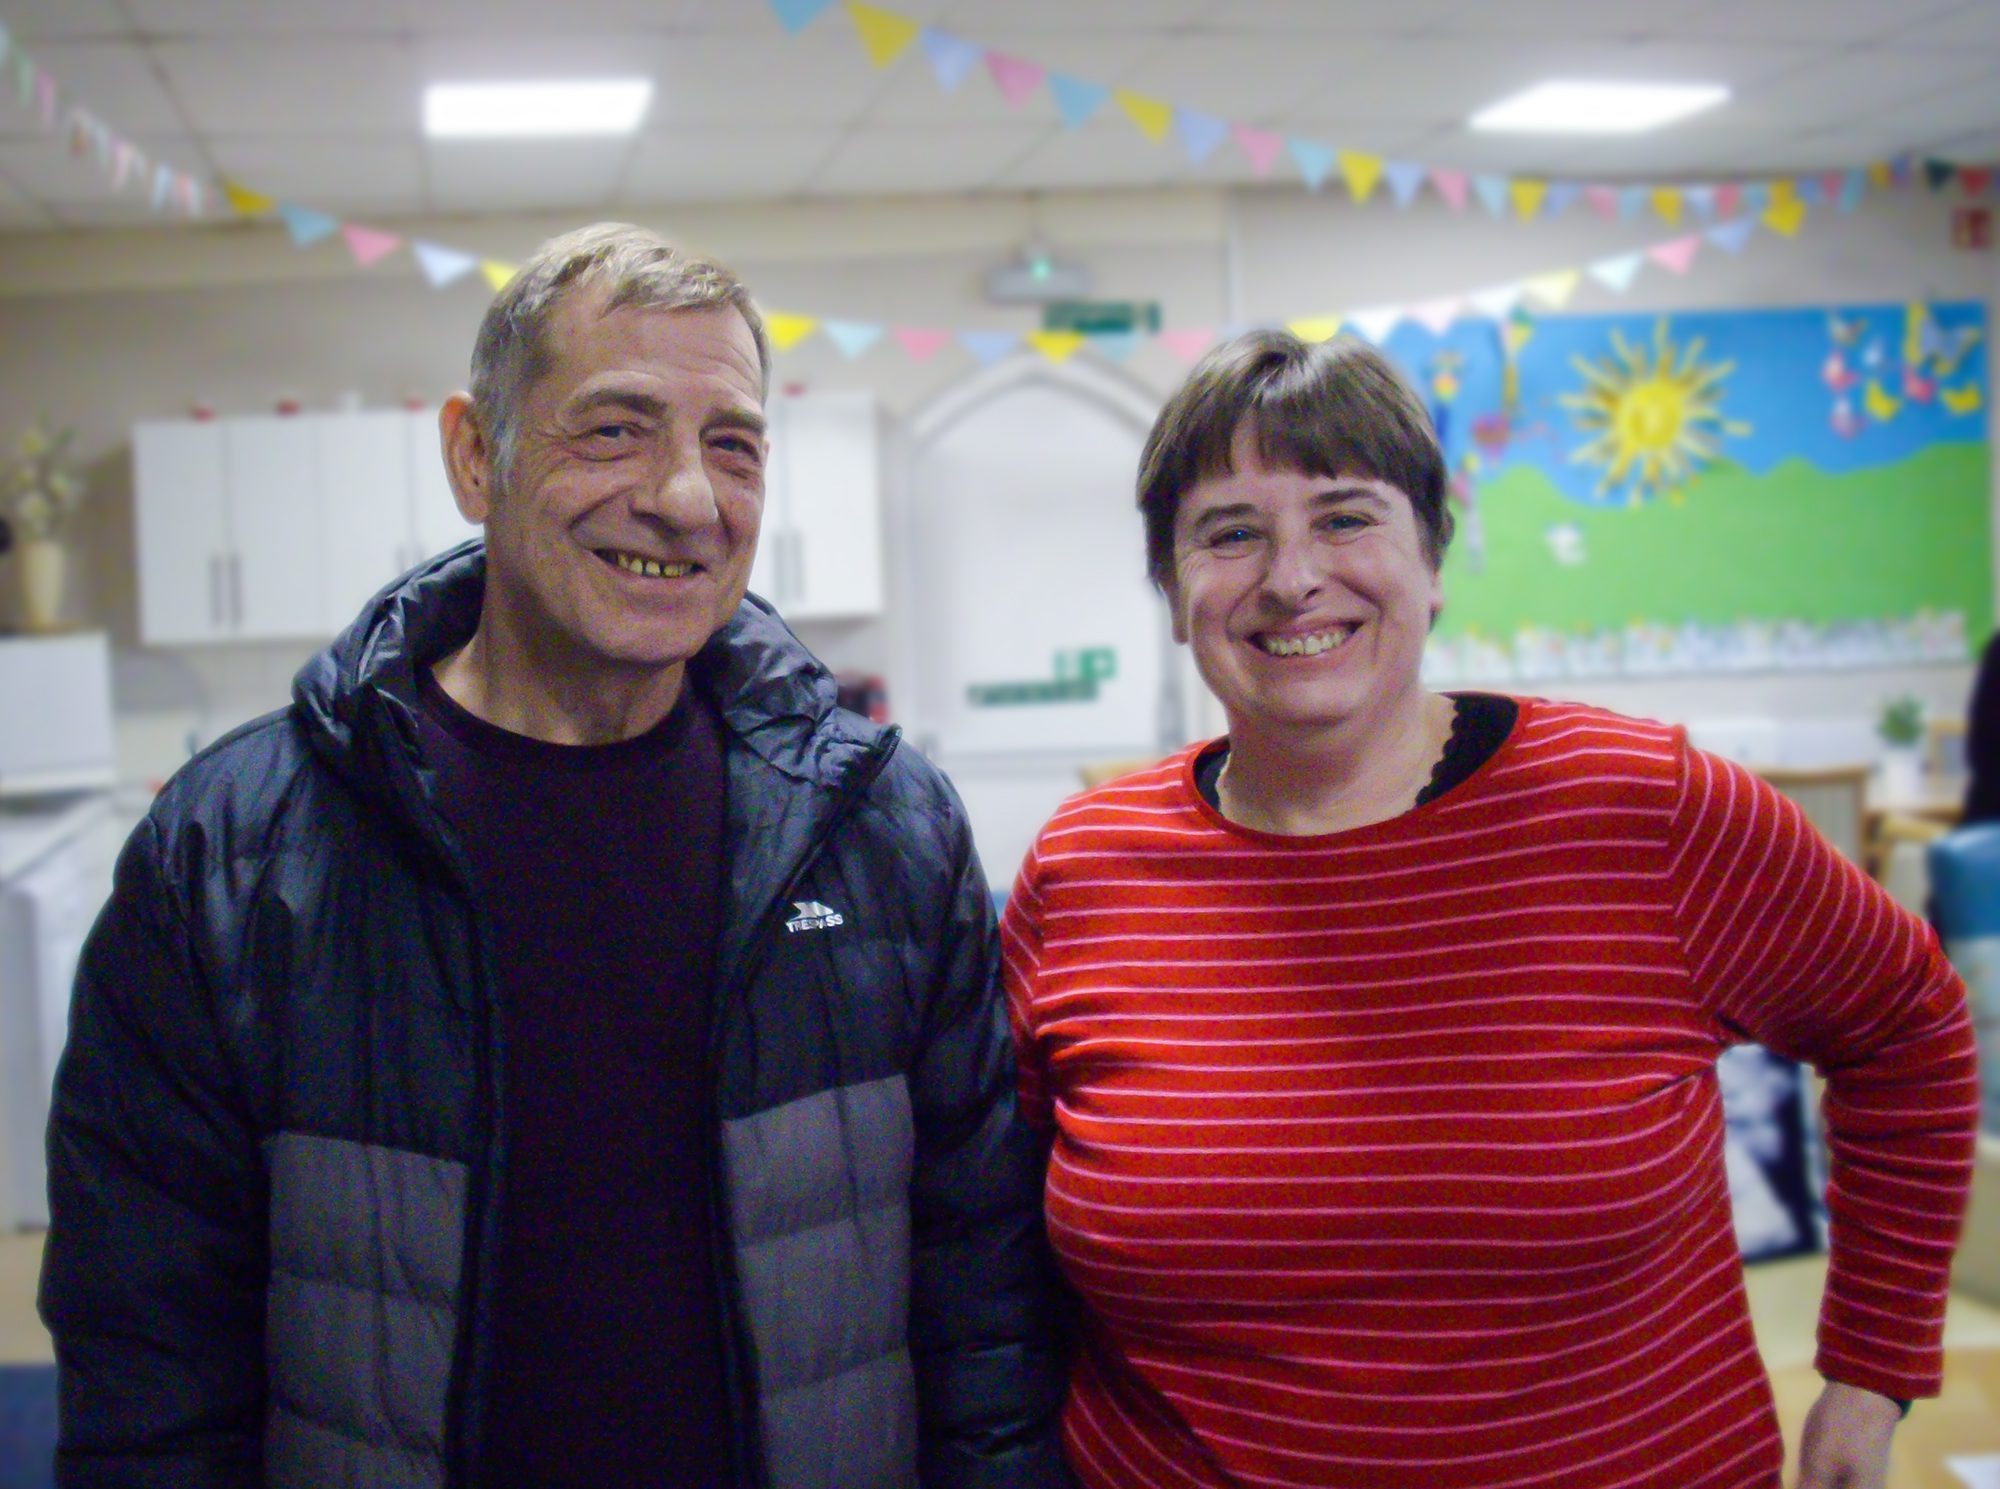 Kidderminster Day Care clients Dave and Wendy on Valentine's Day